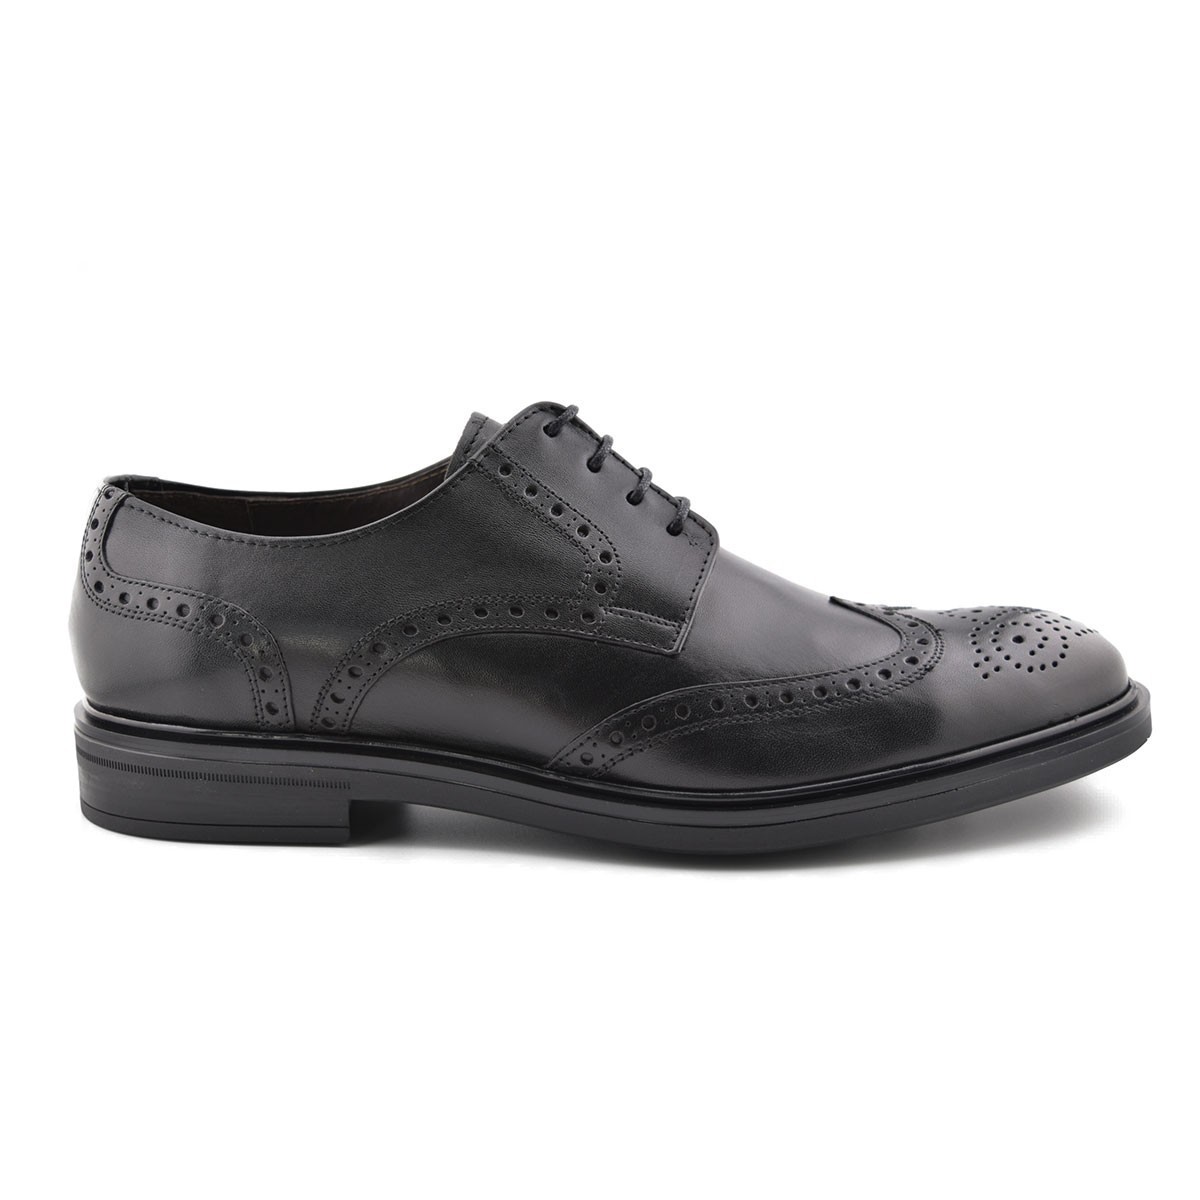 Black leather dress shoes by Latino